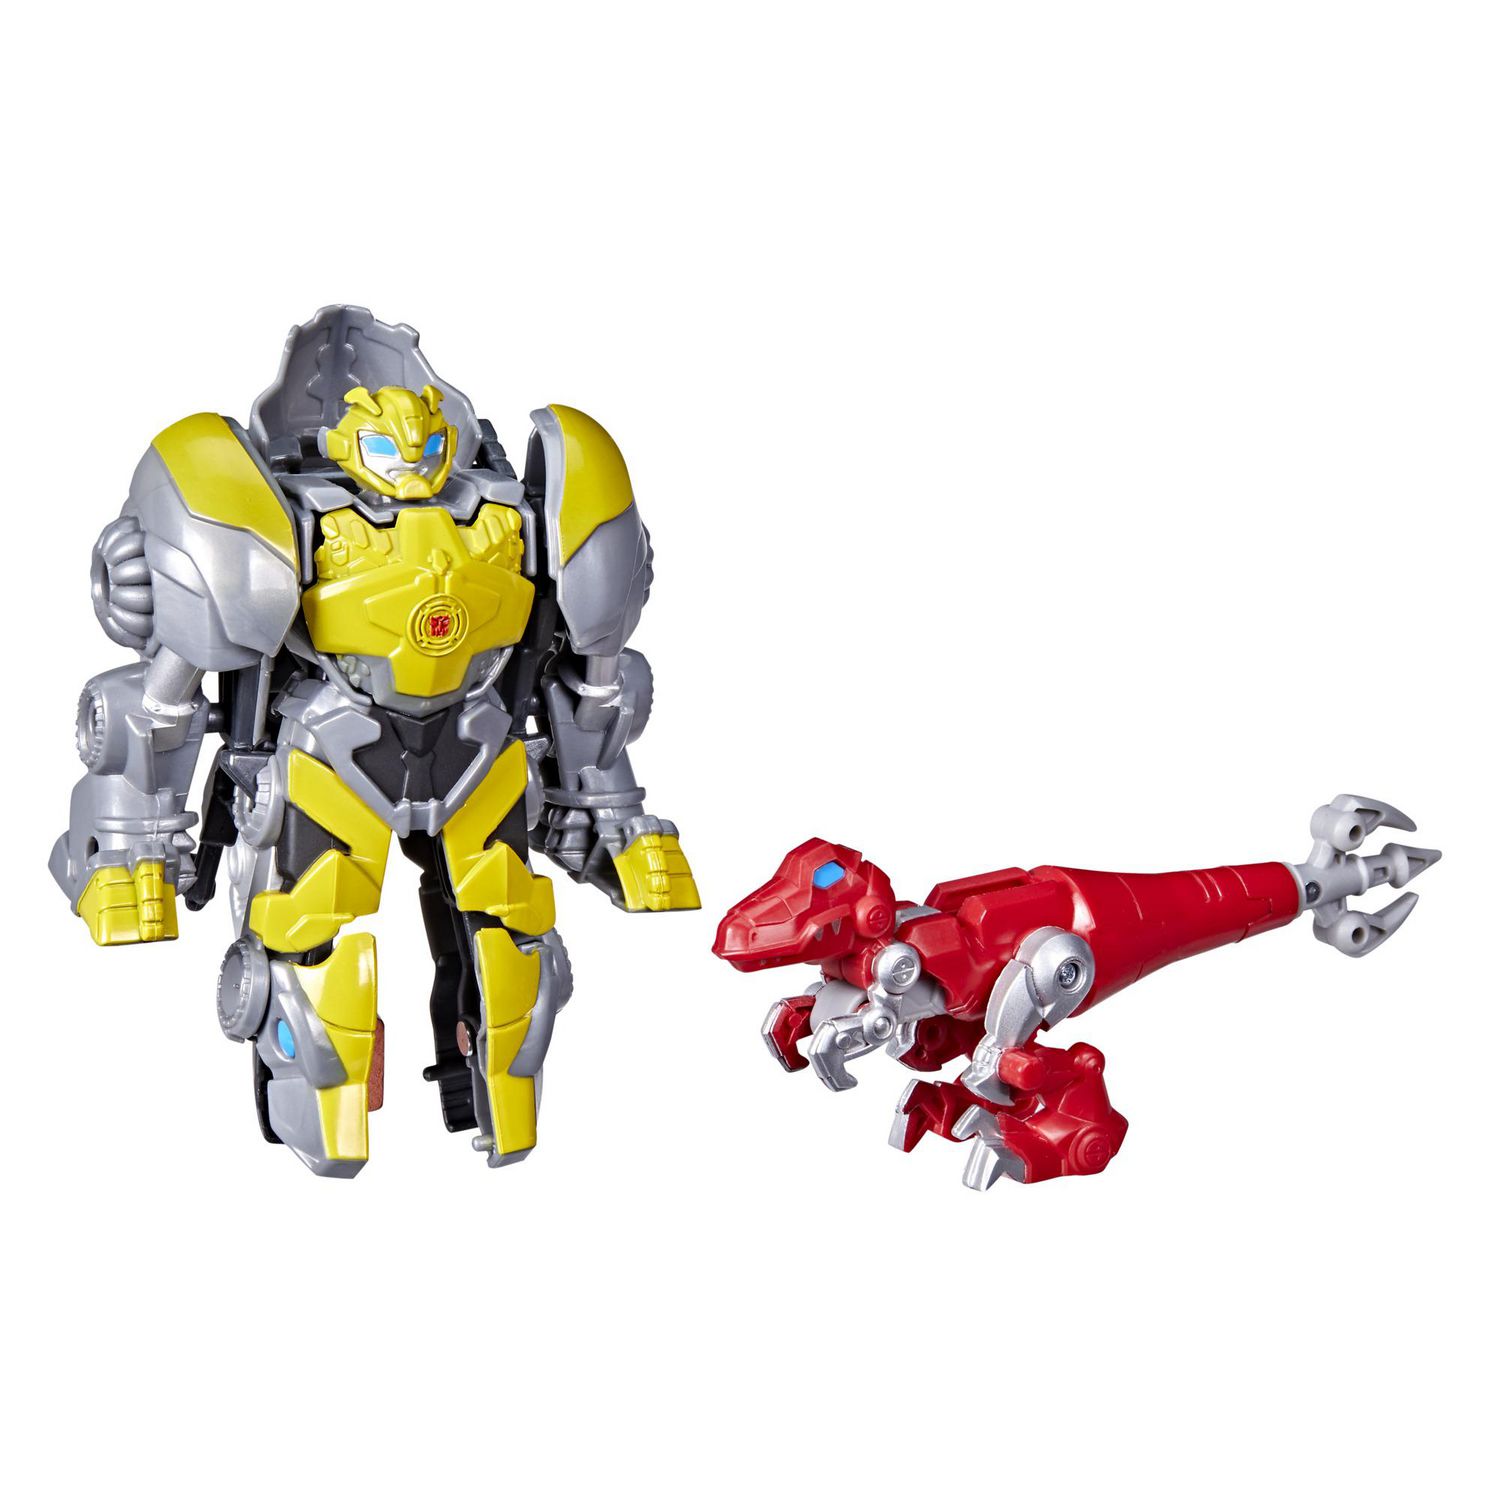 Transformers Dinobot Adventures Dinobot Defenders Bumblebee and Lance the  Raptor-Bot 2-Pack Converting Toys,  Action Figure, Ages 3 and Up |  Walmart Canada